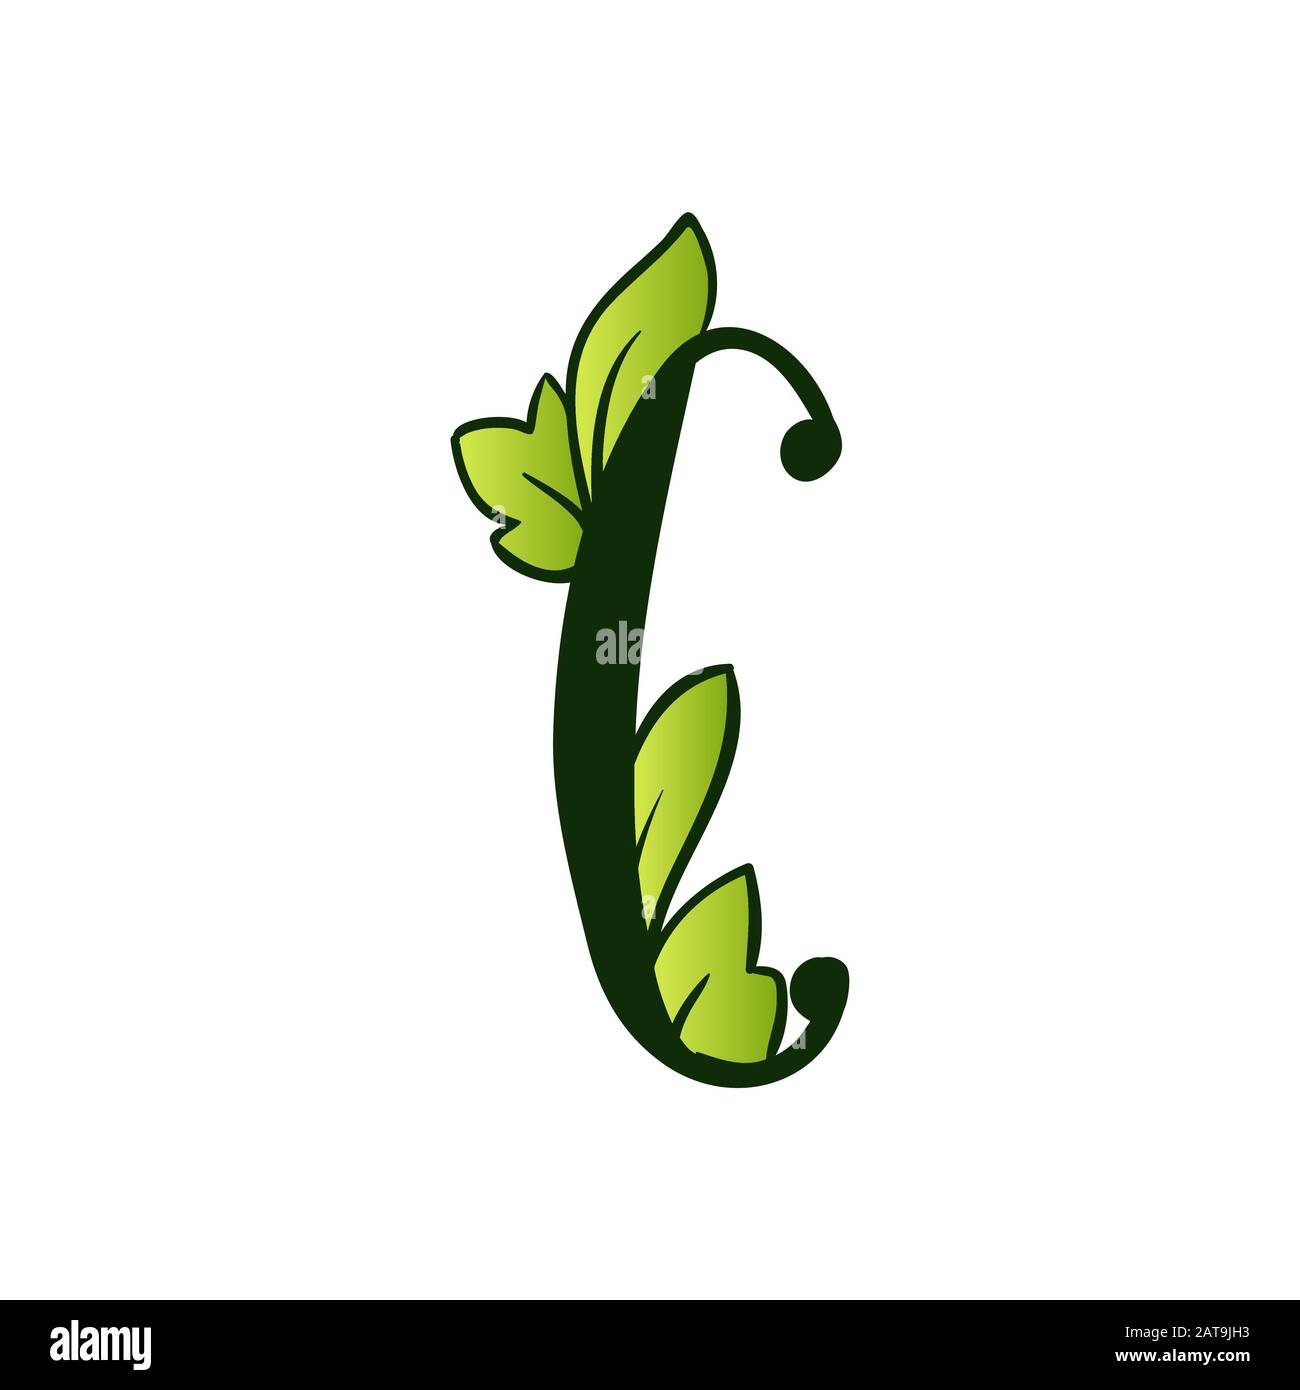 Green Doodling Eco Alphabet Letter C.Type with Leaves. Isolated Latin Uppercase. Typography Bold Spring Letter or Doodle abc Characters for Monogram Words and Logo. Stock Vector